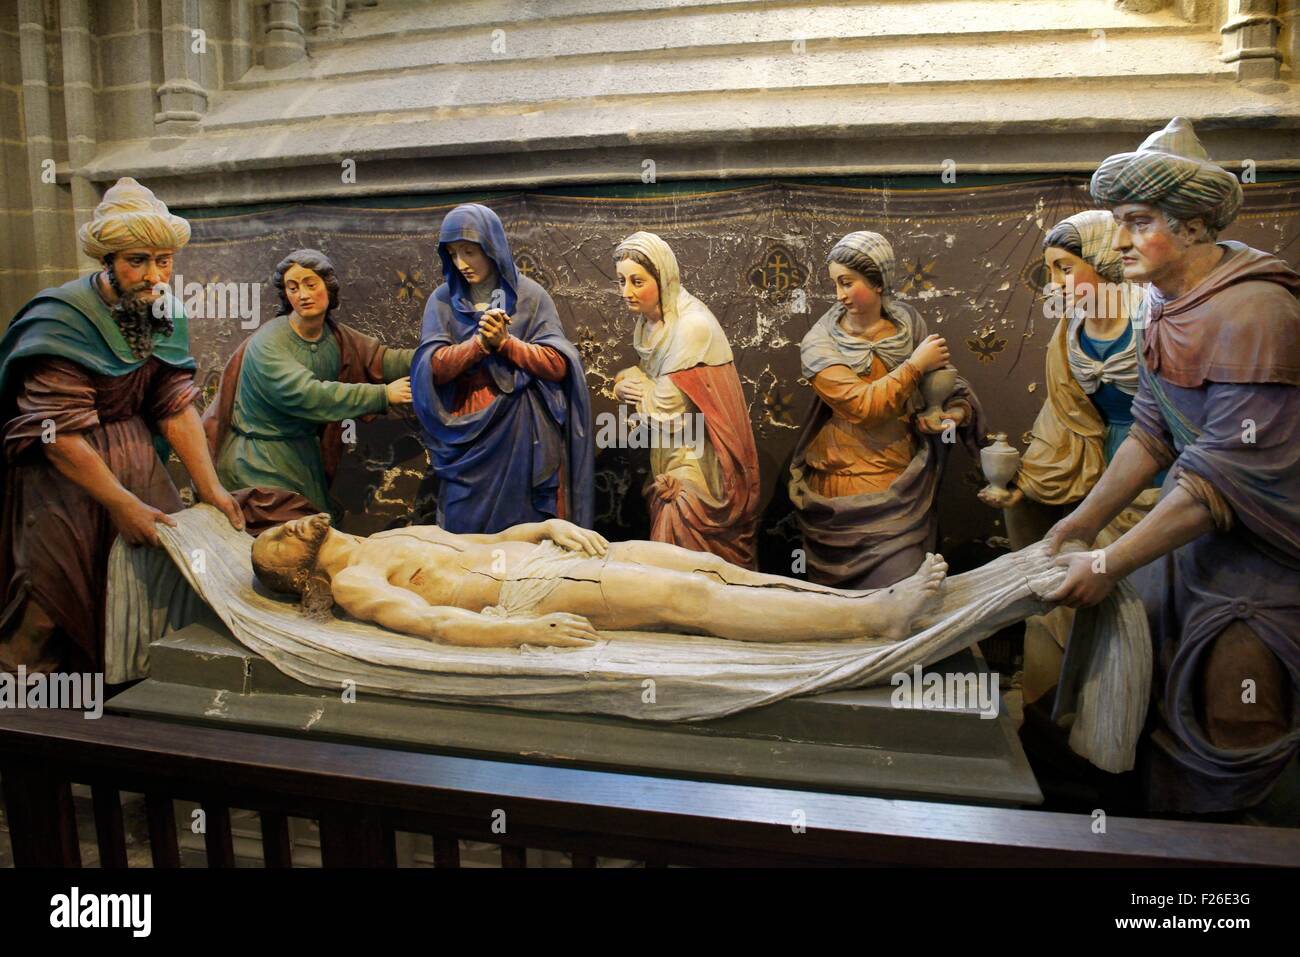 19 C Entombment of Christ tableau in Cathedral of Saint Corentin in the mediaeval city of Quimper, Finistere, Brittany, France Stock Photo